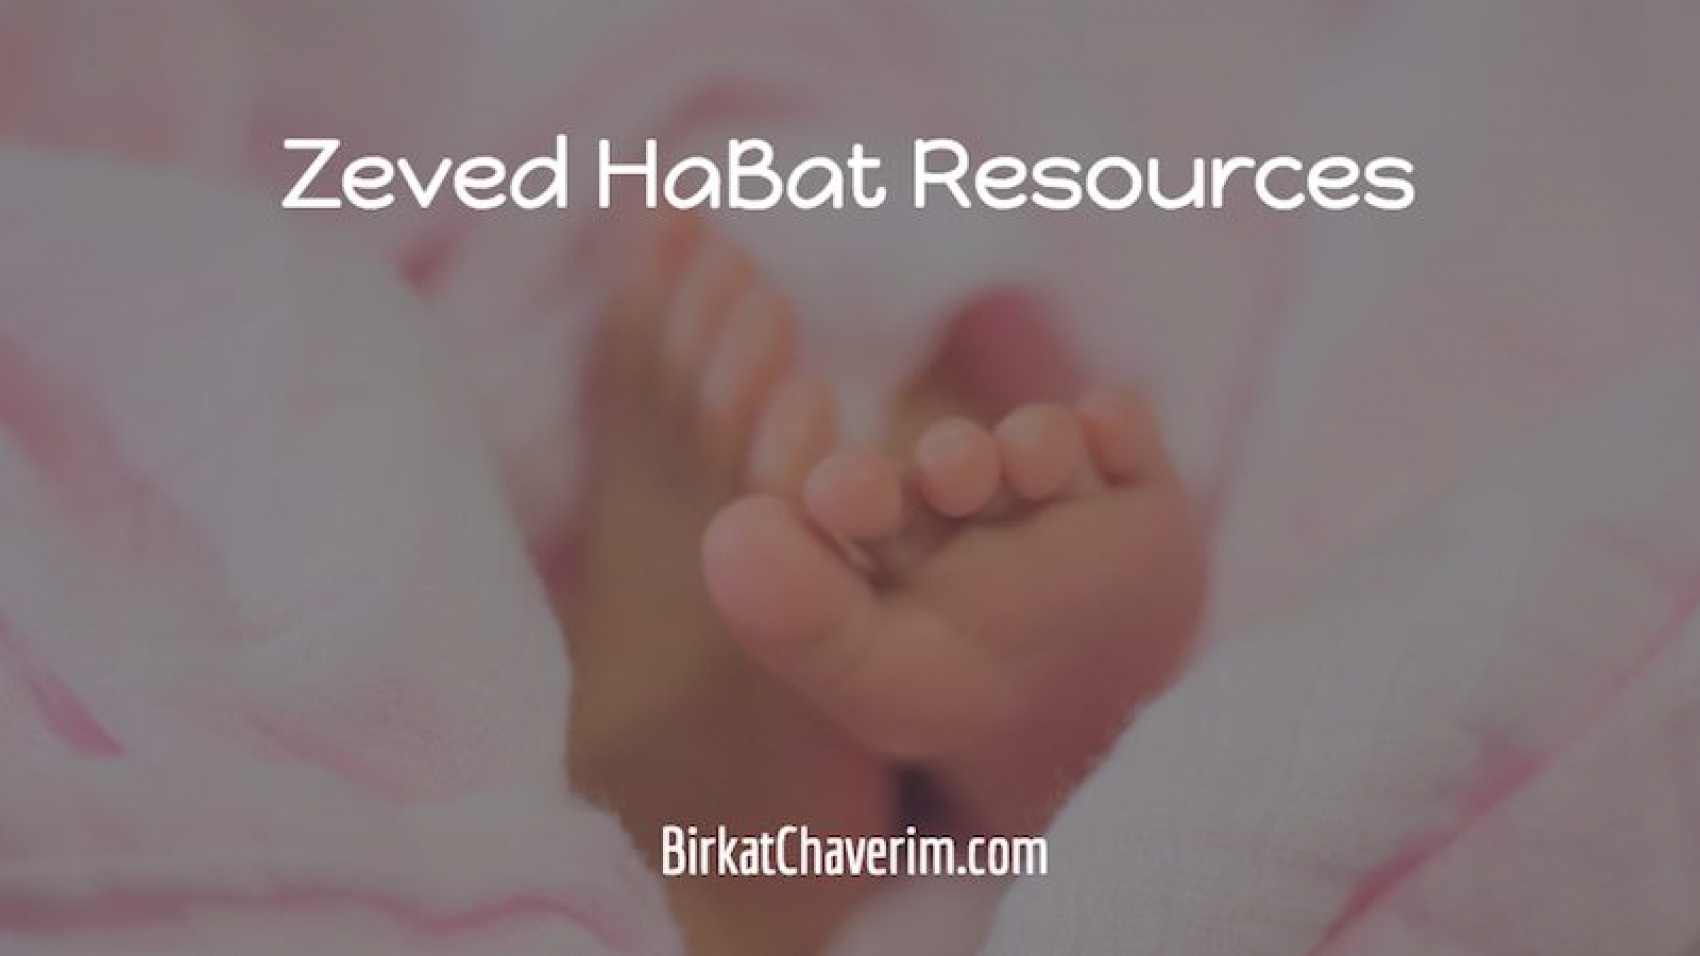 baby feet on pink blanket as backdrop for text Zeved Habat Resources